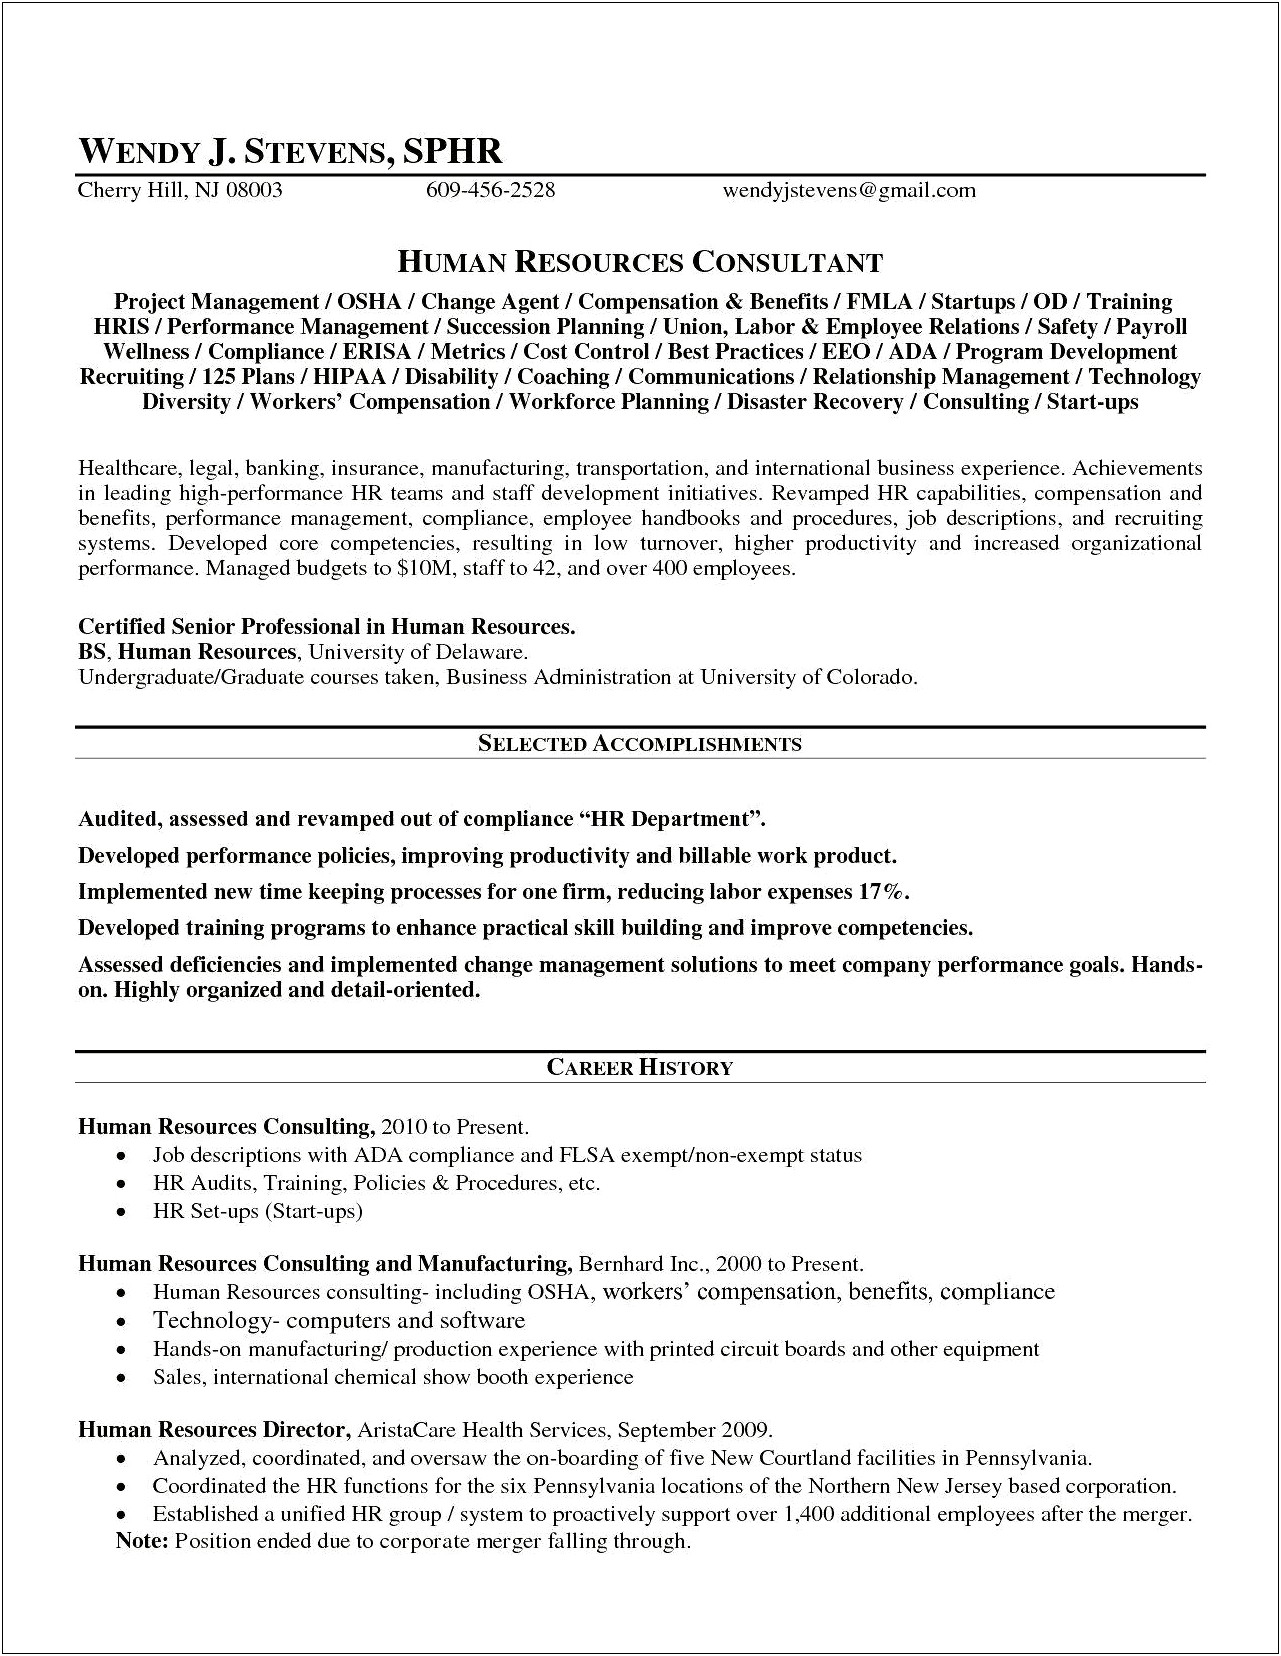 Resume Objective Examples Healthcare Consultant